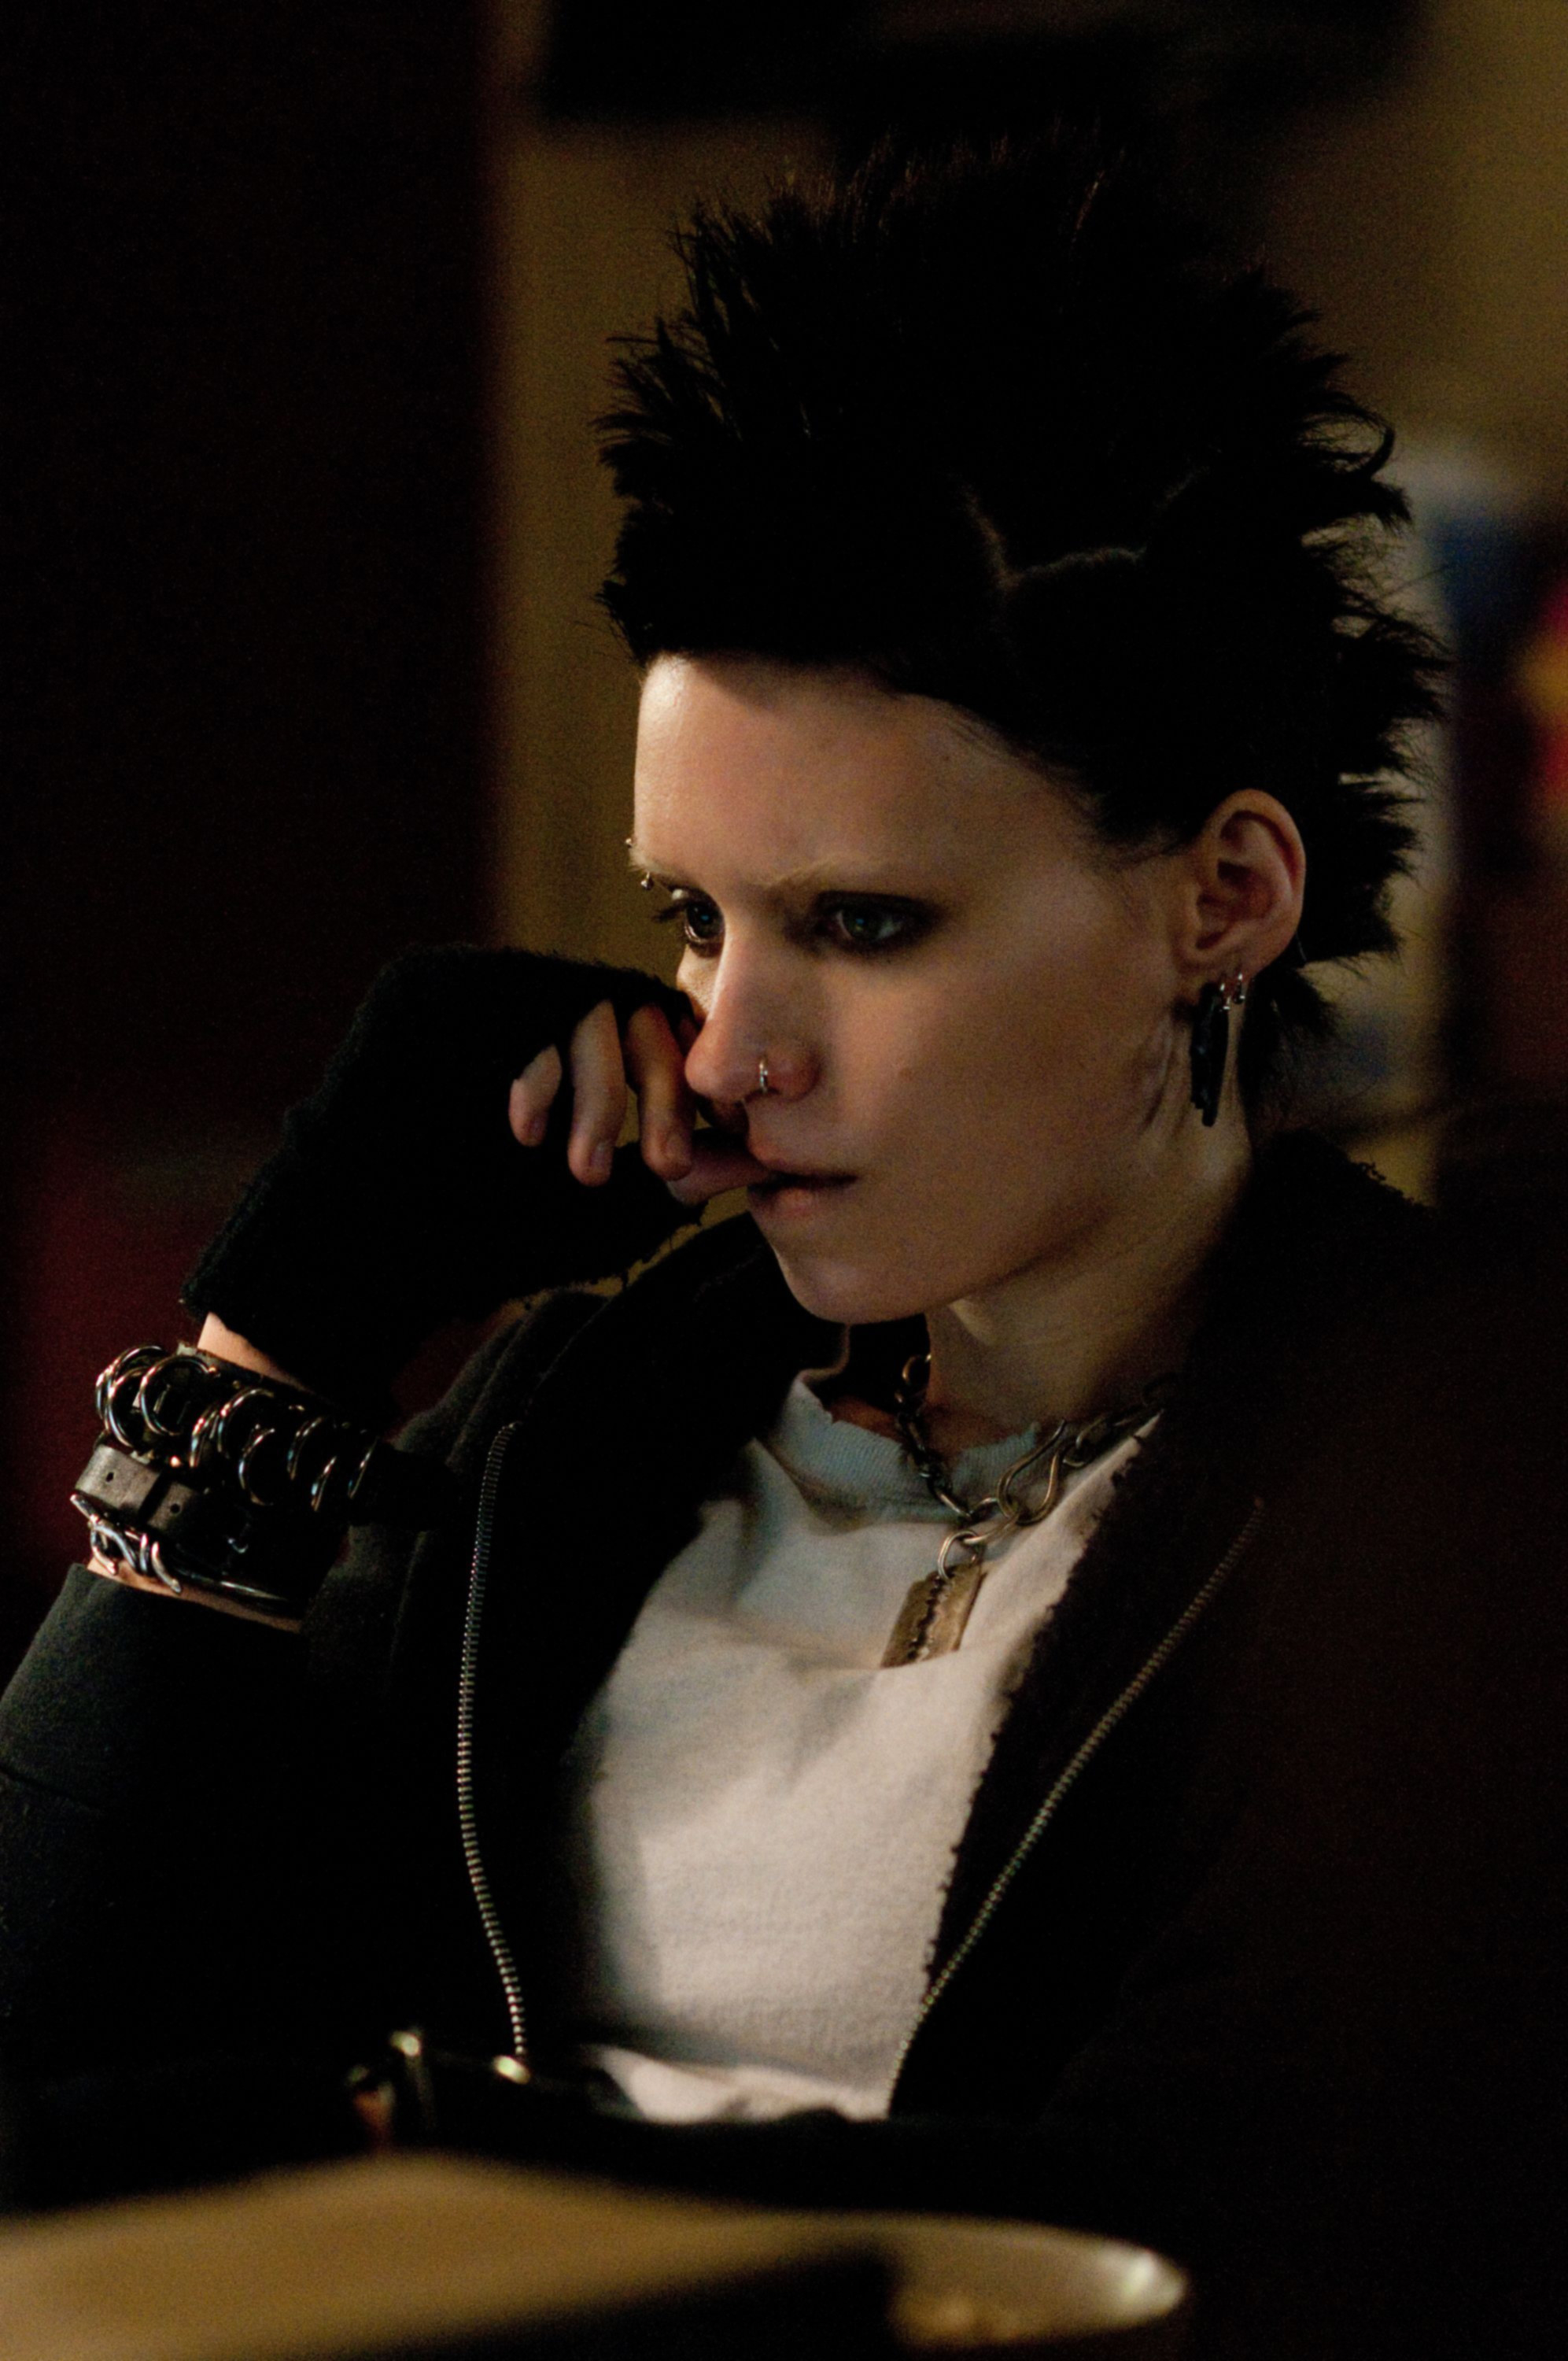 A contemplative Rooney sitting in a scene from Girl with a Dragon tattoo